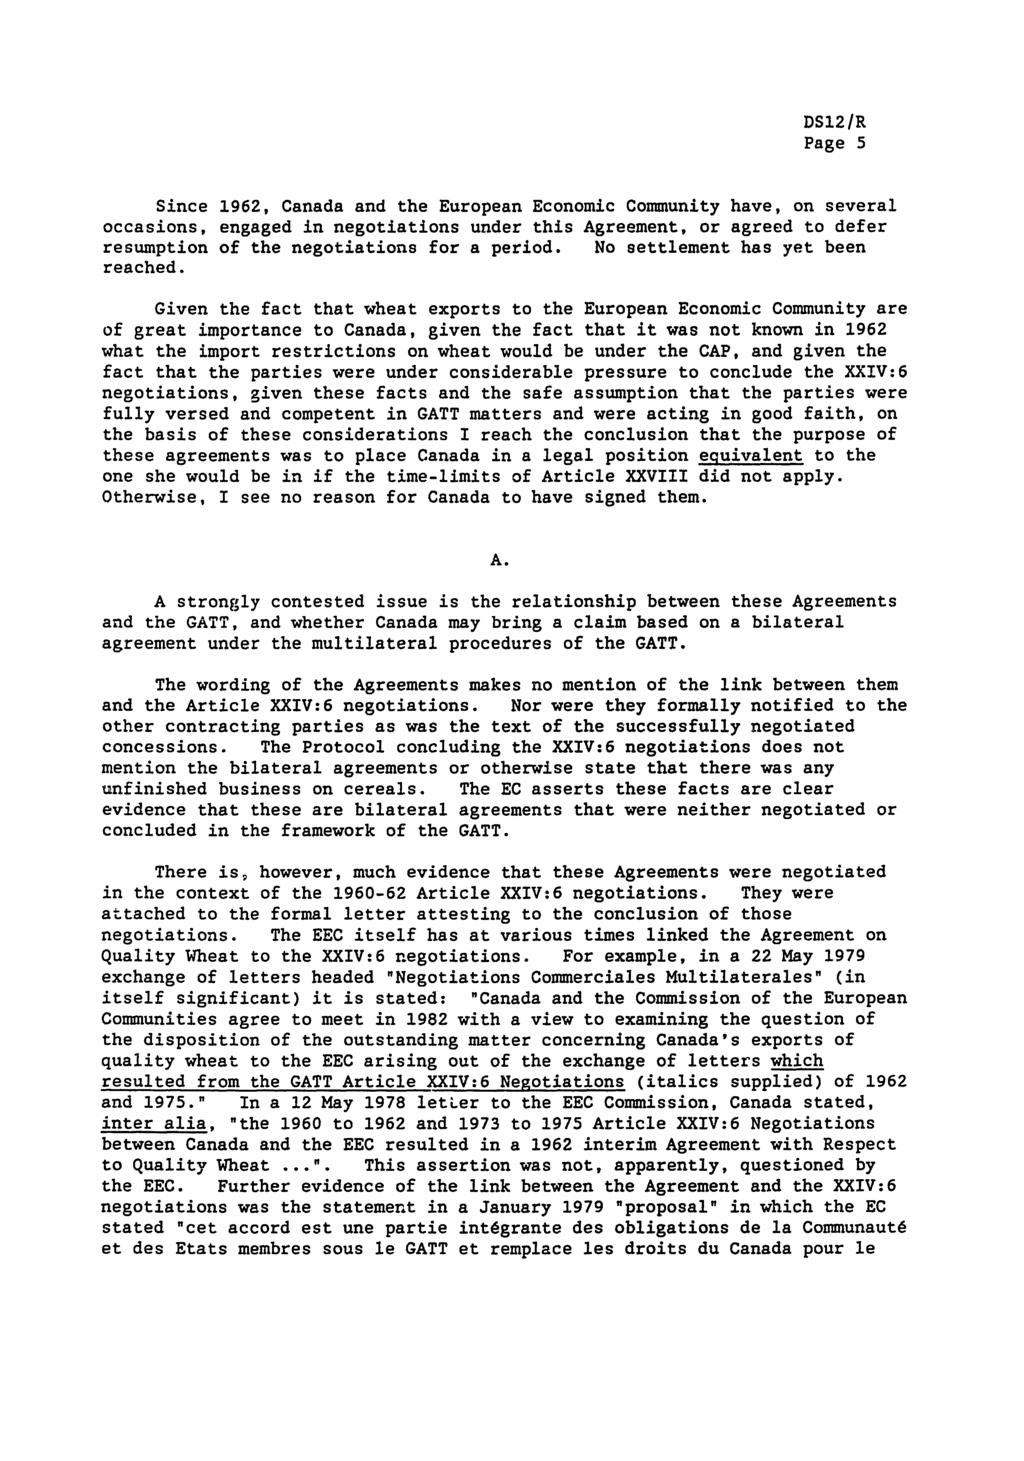 Page 5 Since 1962, Canada and the European Economic Community have, on several occasions, engaged in negotiations under this Agreement, or agreed to defer resumption of the negotiations for a period.